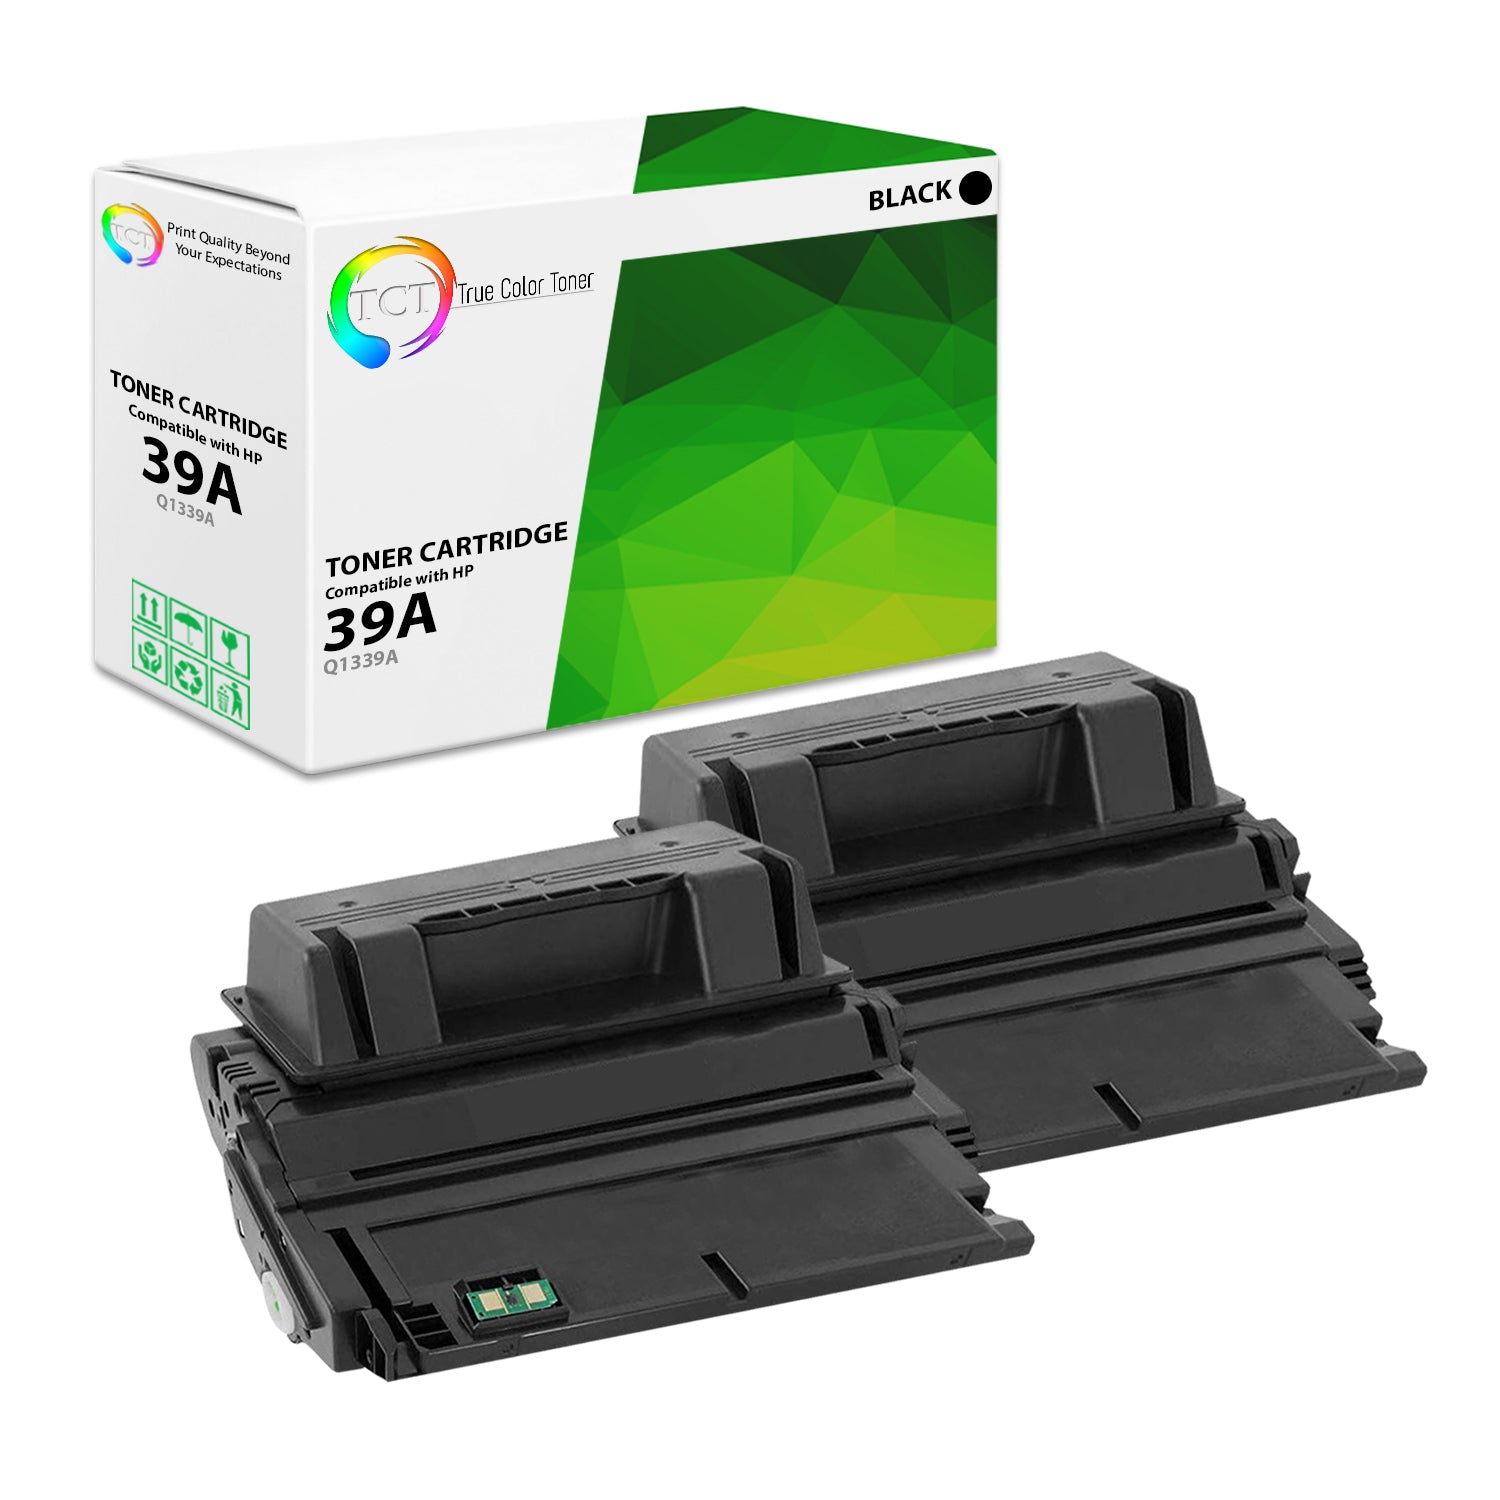 TCT Compatible Toner Cartridge Replacement for the HP 39A Series - 2 Pack Black